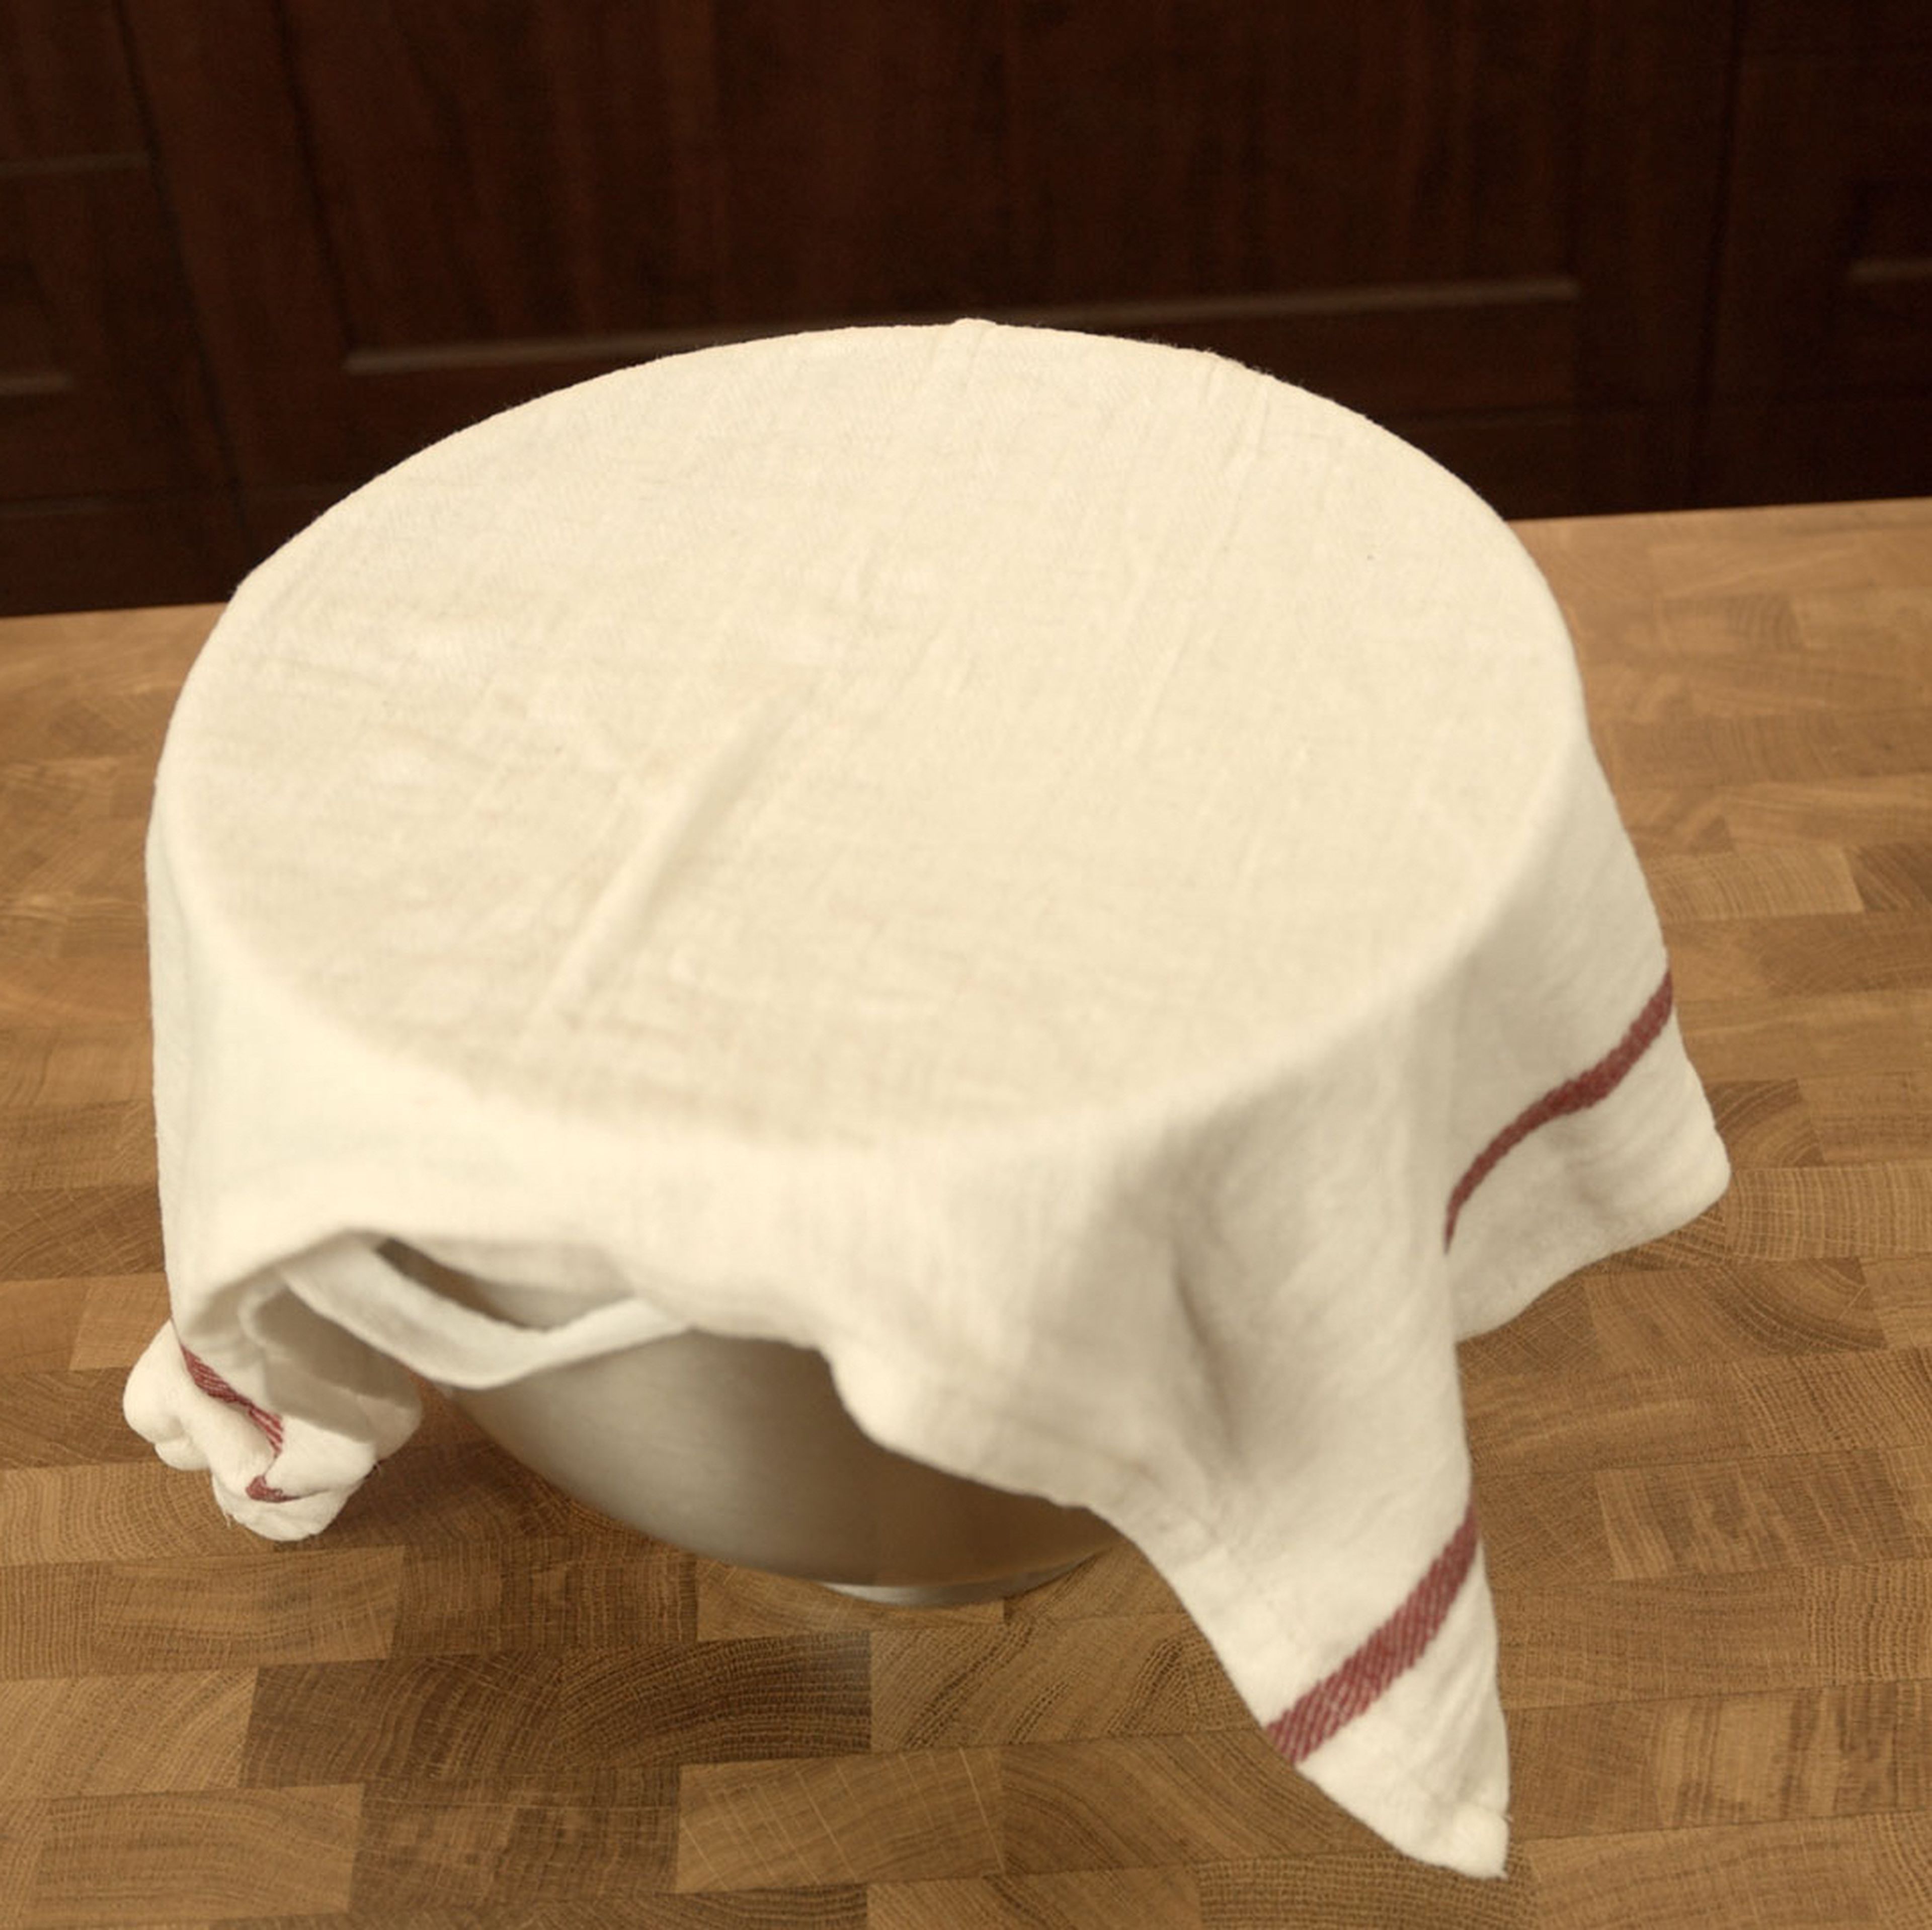 Cover with a wet/damp towel to prevent the dough from drying out